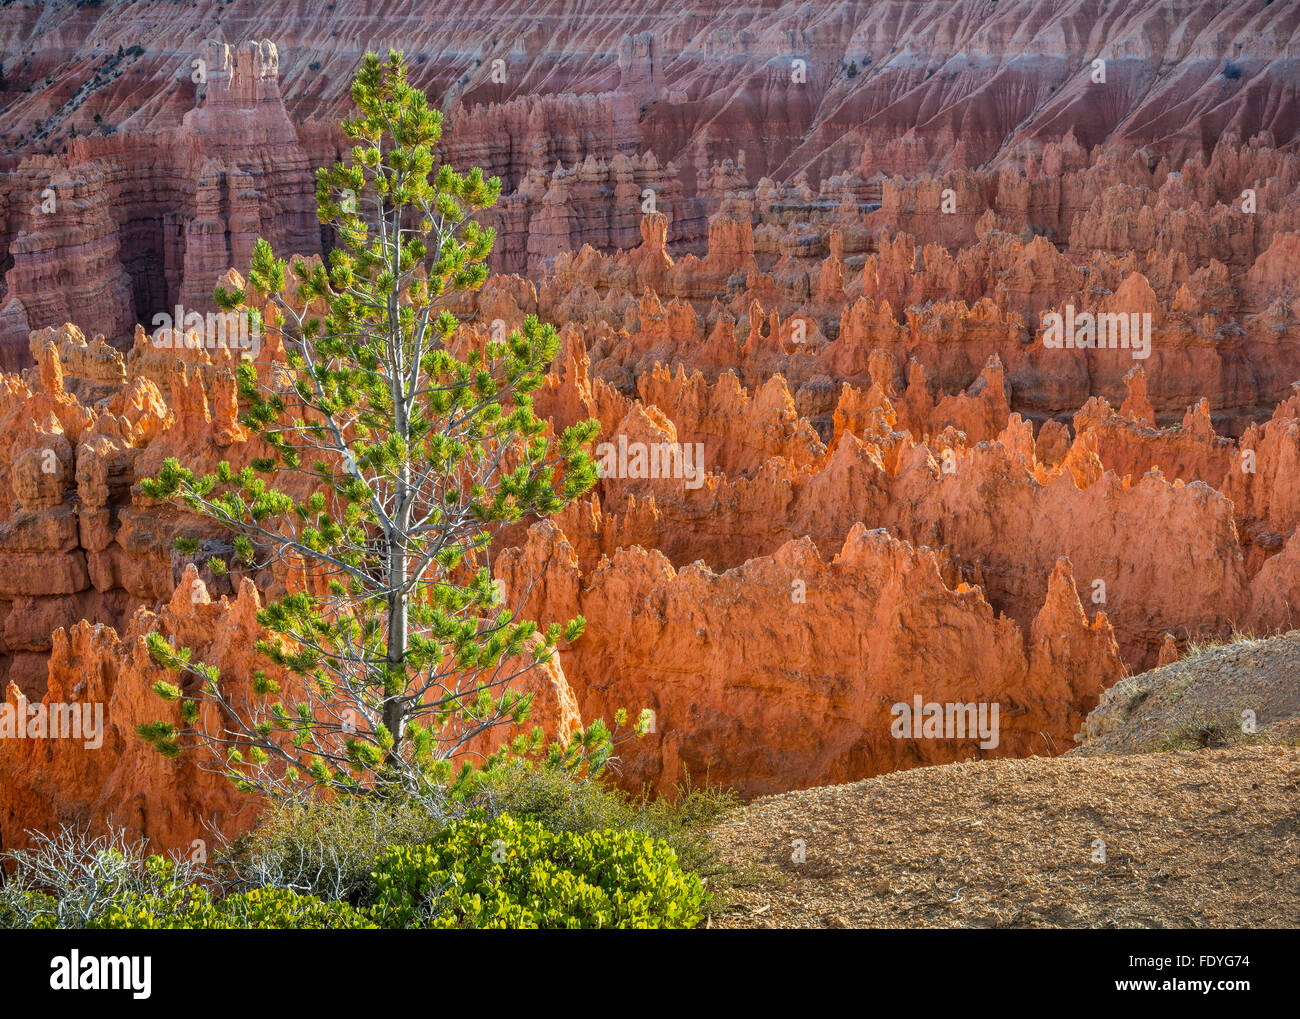 Bryce Canyon National Park, UT: Small pine tree on the edge the Bryce Canyon Ampitheater in the section called Silent City. Stock Photo